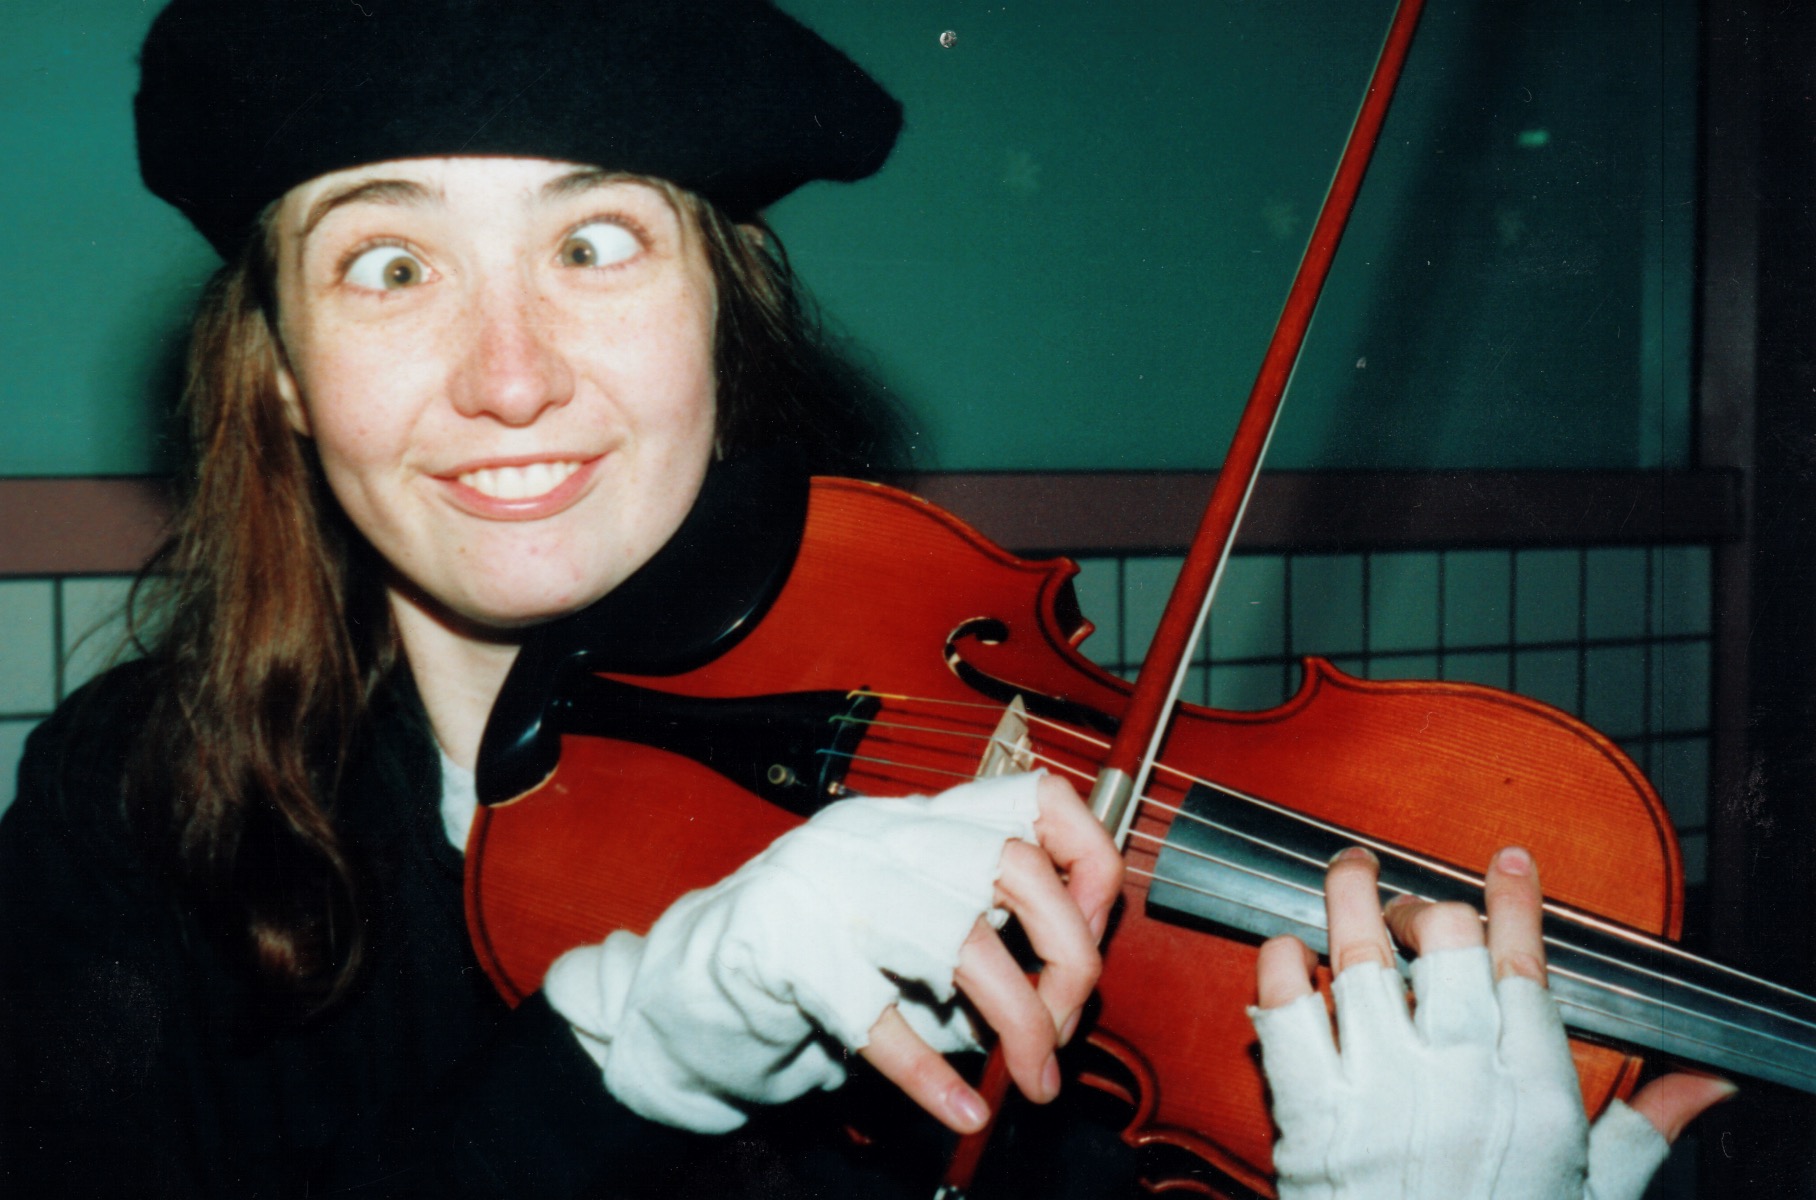 Rhiannon in a coat, playing violin with fingerless gloves, making a funny face and crossing her eyes